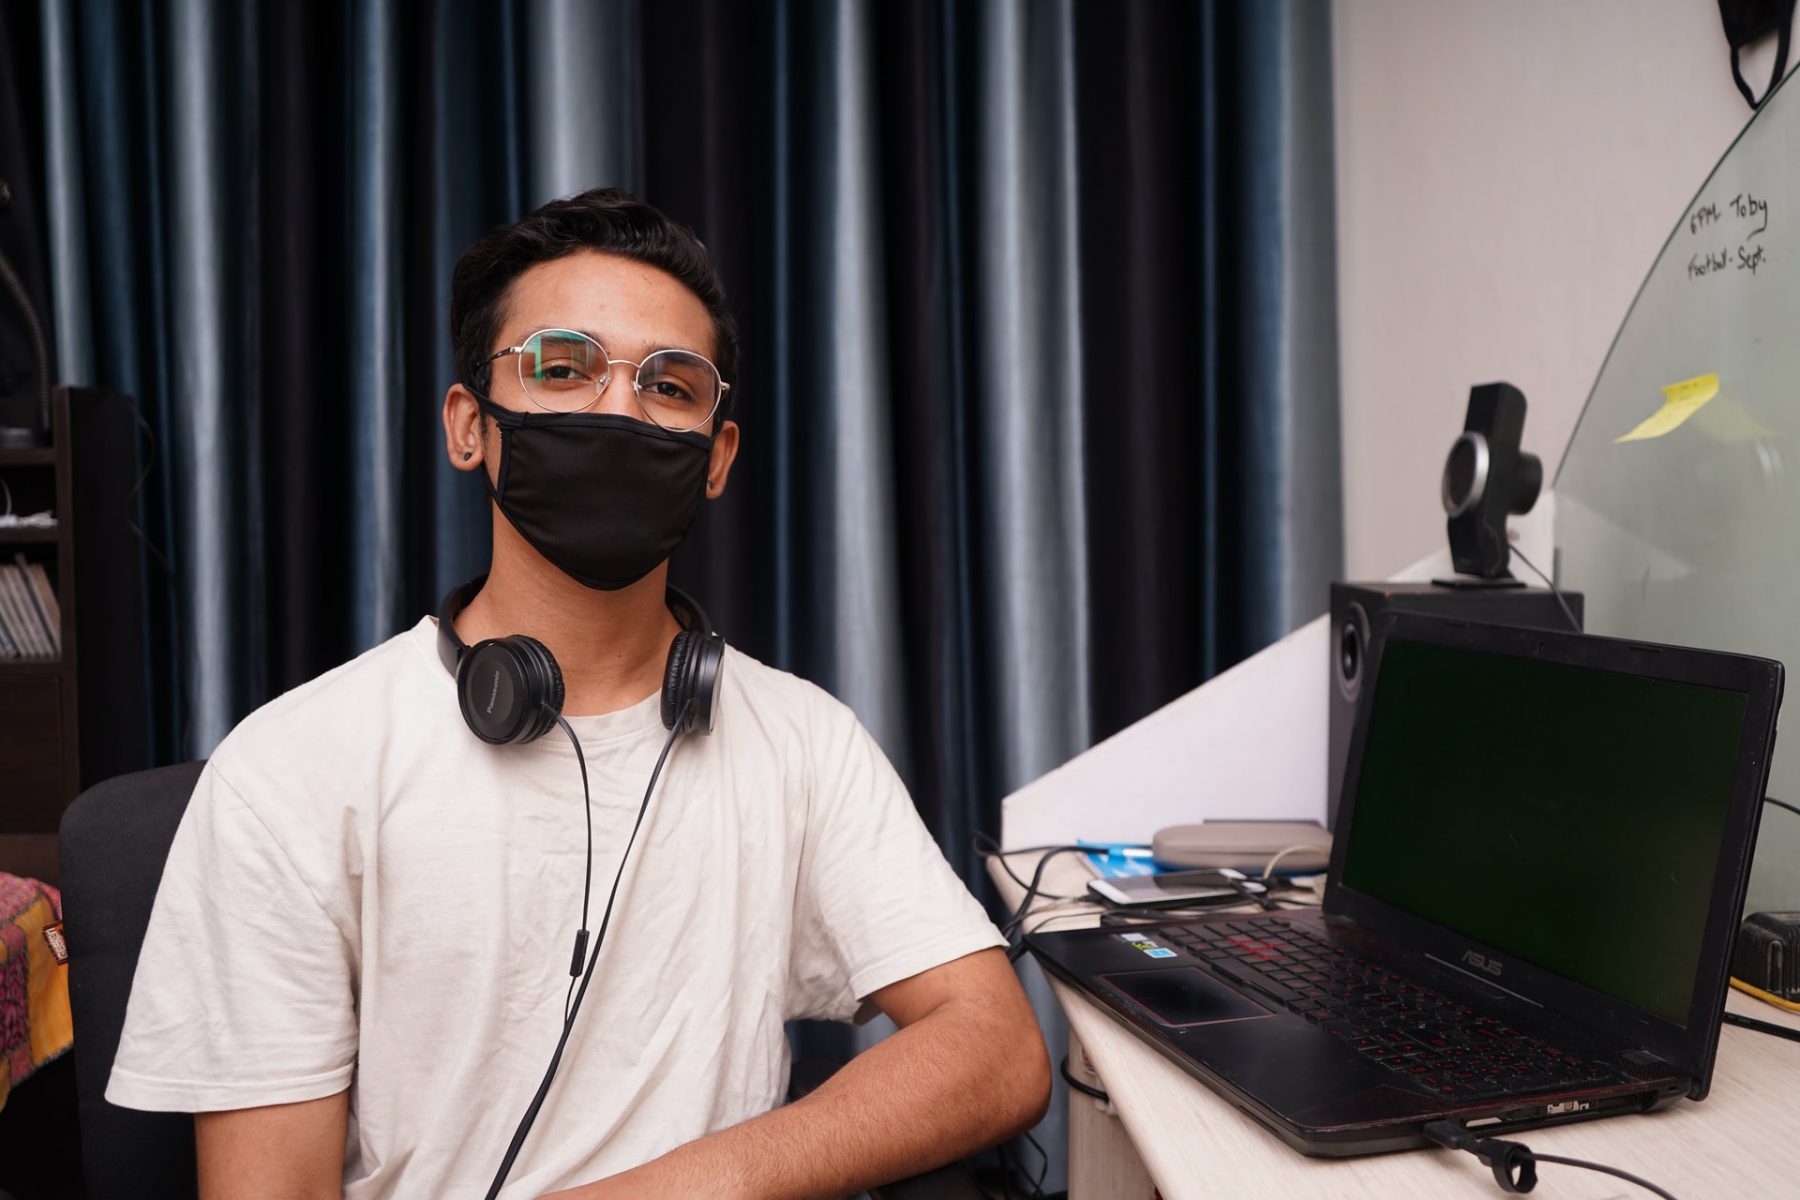 man in headphones and face mask sitting near a computer